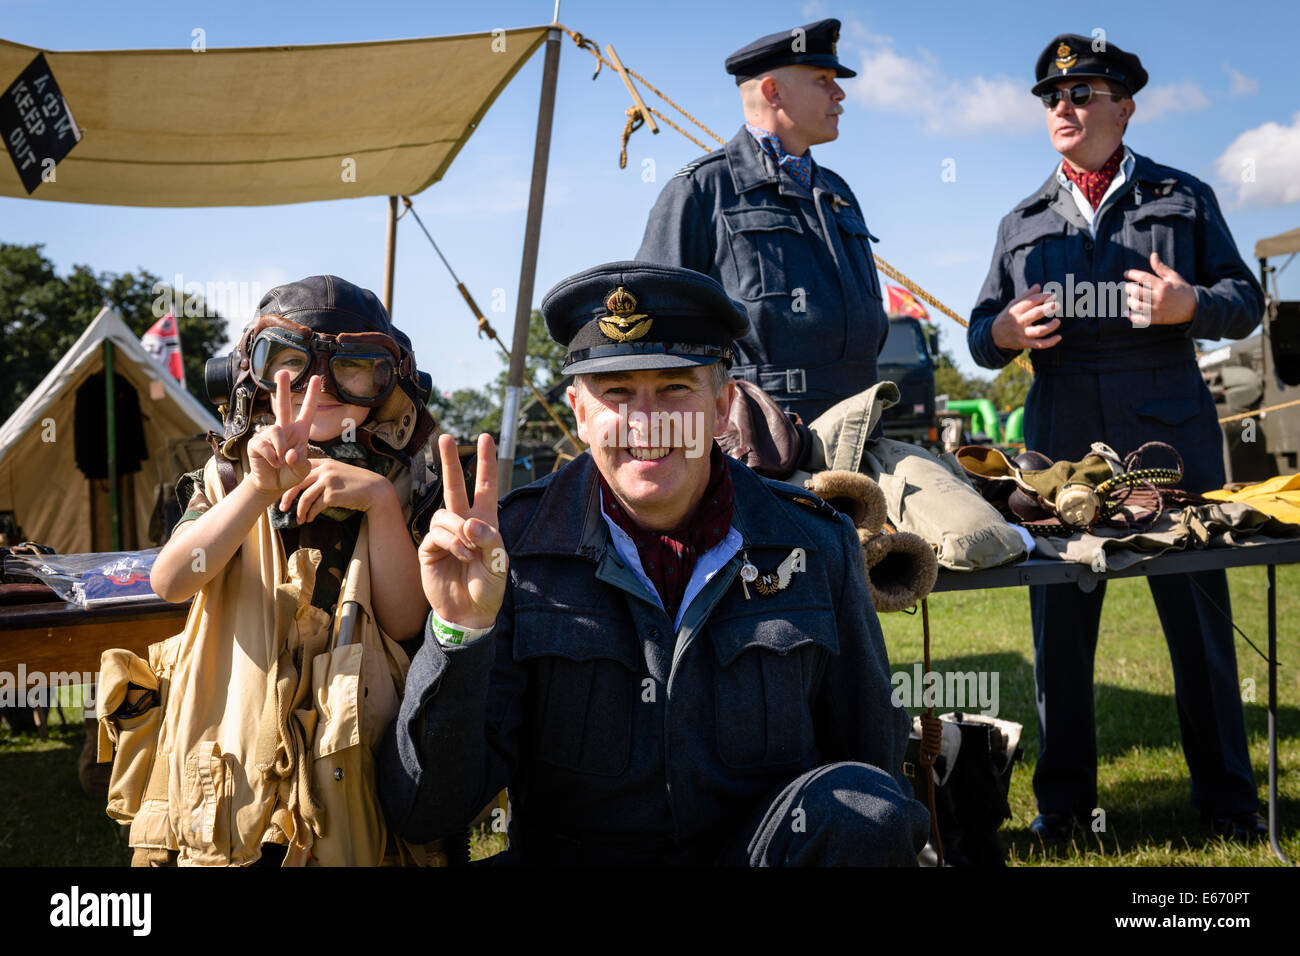 Kent, UK. 16th Aug, 2014. Men in RAF uniforms posing for photos to collect for charity at The 6th Annual Combined Ops Show at Headcorn Airfield. Featuring fly-overs, war re-enactments, fancy dress, actual and replica memorabilia, and more. Credit:  Tom Arne Hanslien/Alamy Live News Stock Photo